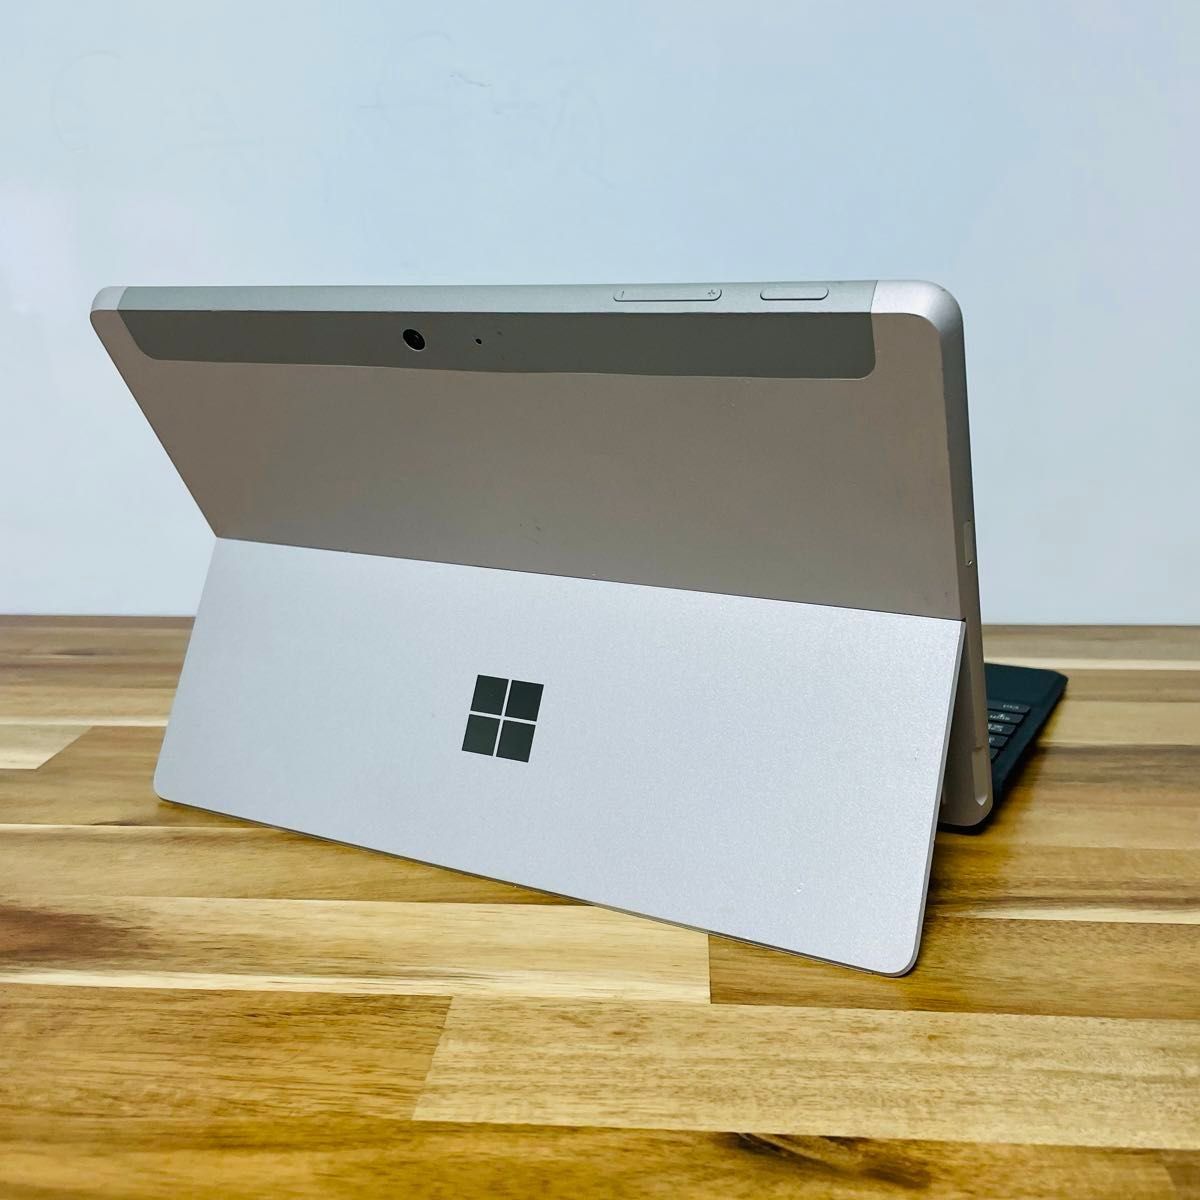 Microsoft Surface マイクロソフト タブレット パソコン SSD WiFi 無線 純正 タイプカバー セット